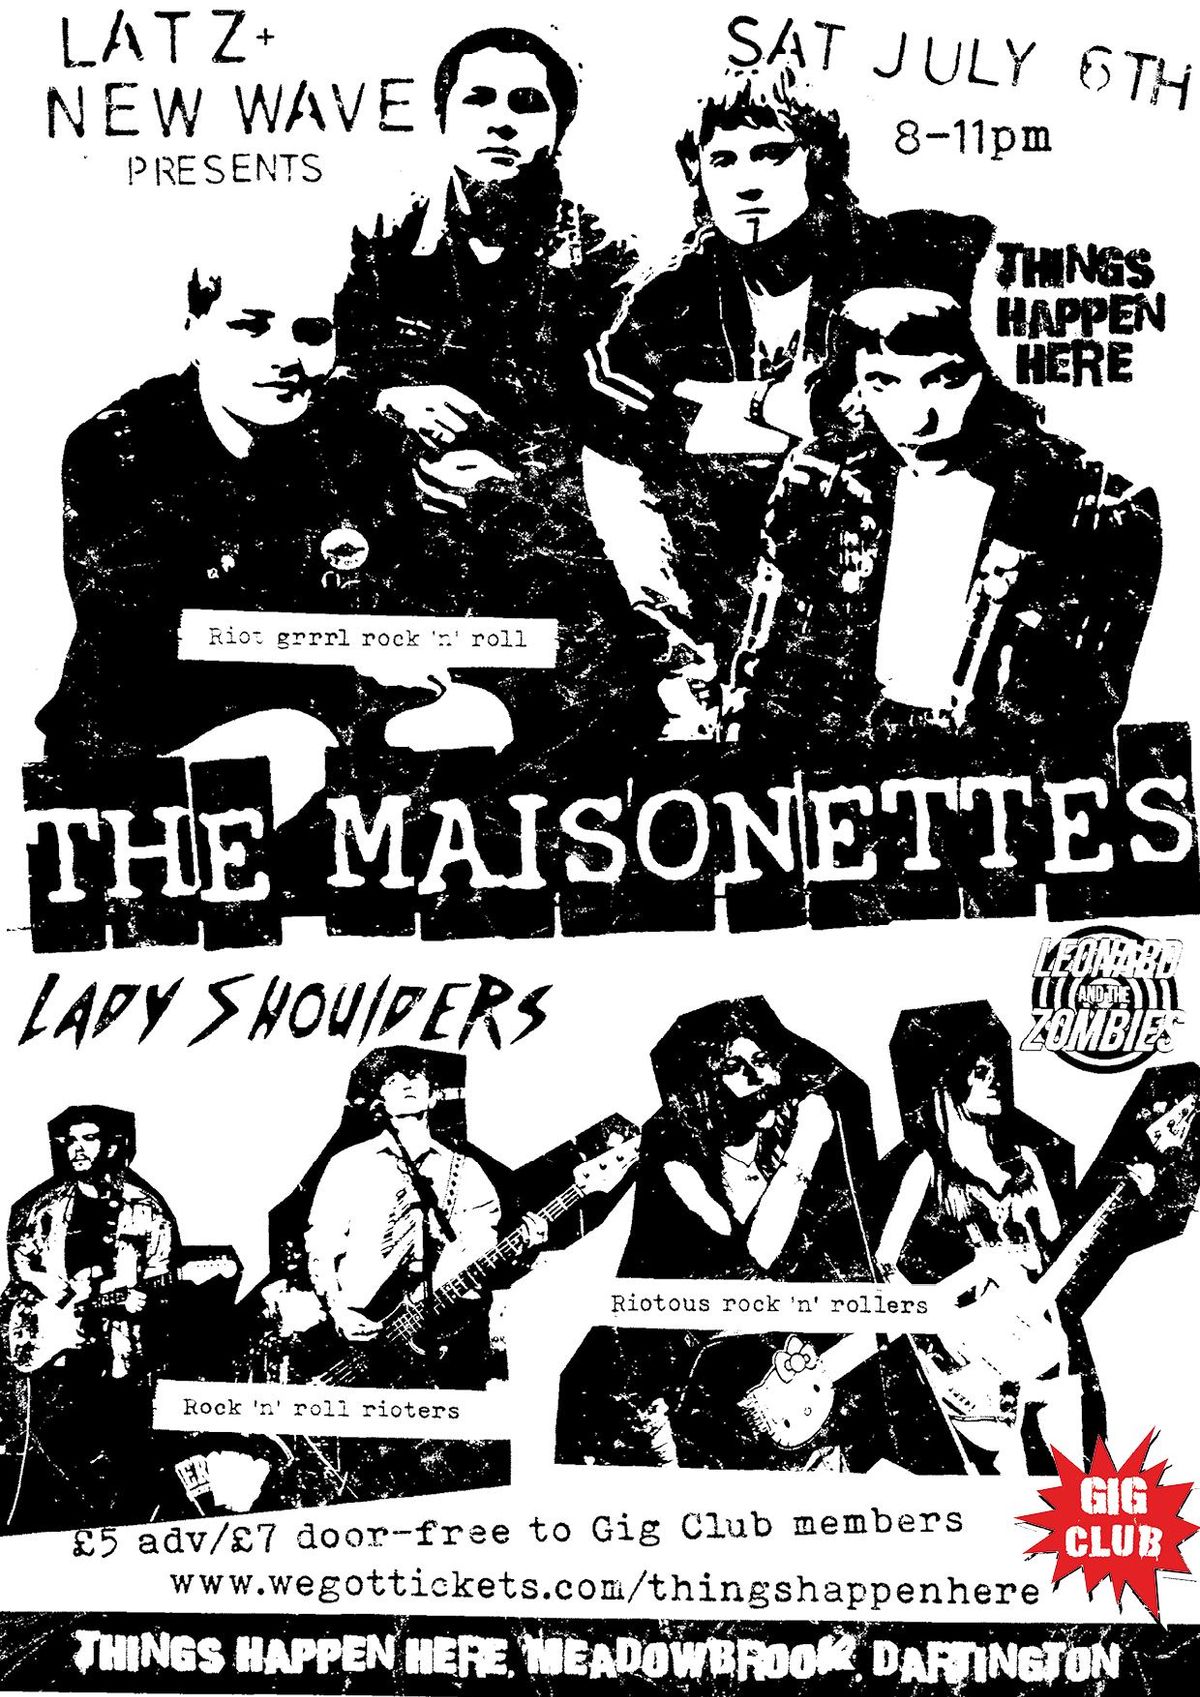 THE MAISONETTES PLUS LADY SHOULDERS & LEONARD AND THE ZOMBIES